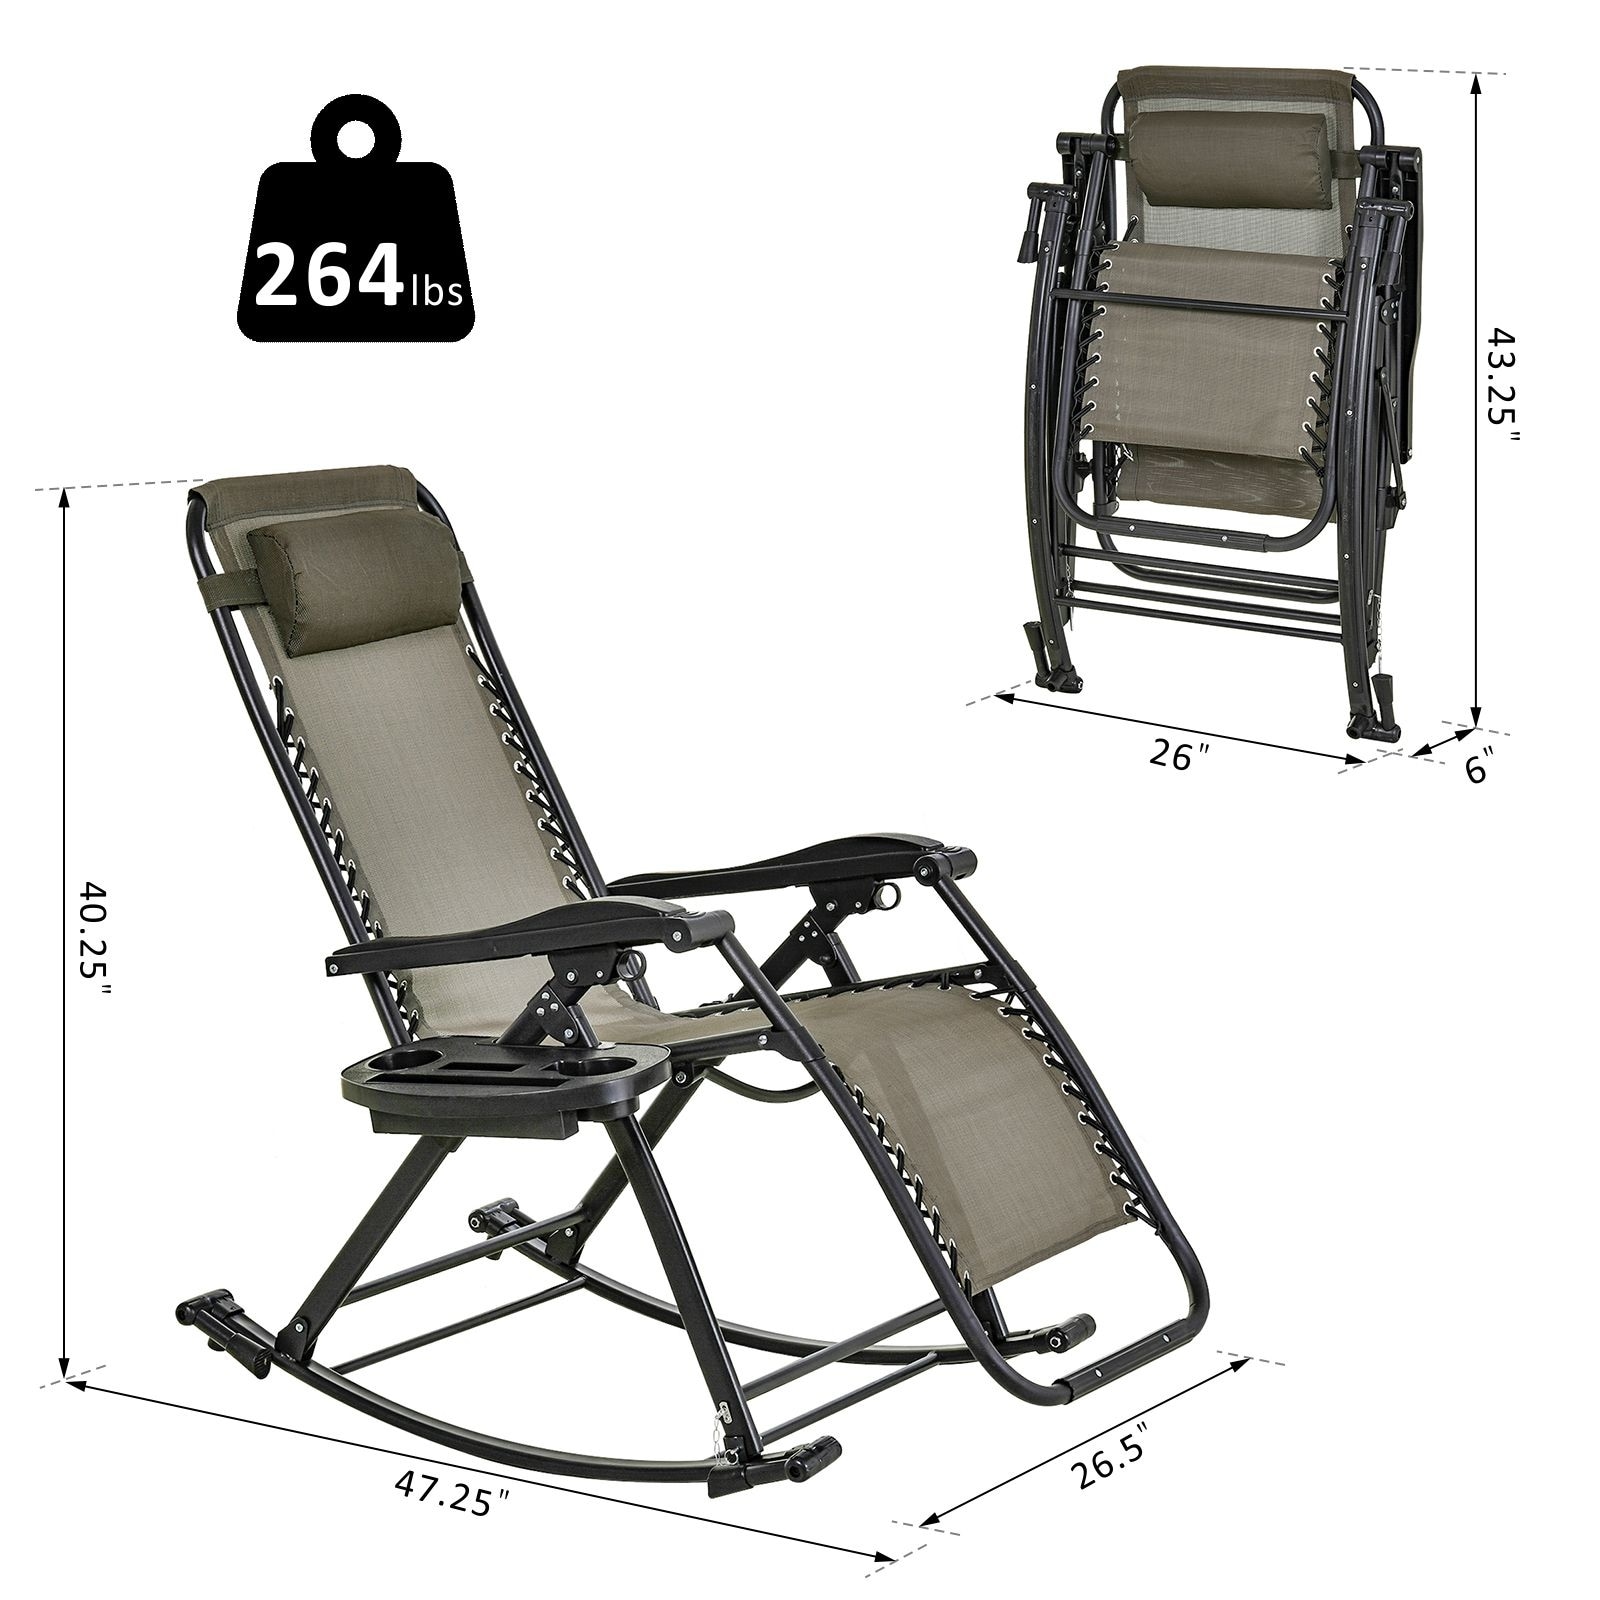 Outsunny Zero Gravity Lounge Chair Adjustable Rattan Wicker Lounger with Cup Holder Pool Headrest for Garden Phone Container Backyard Porch 